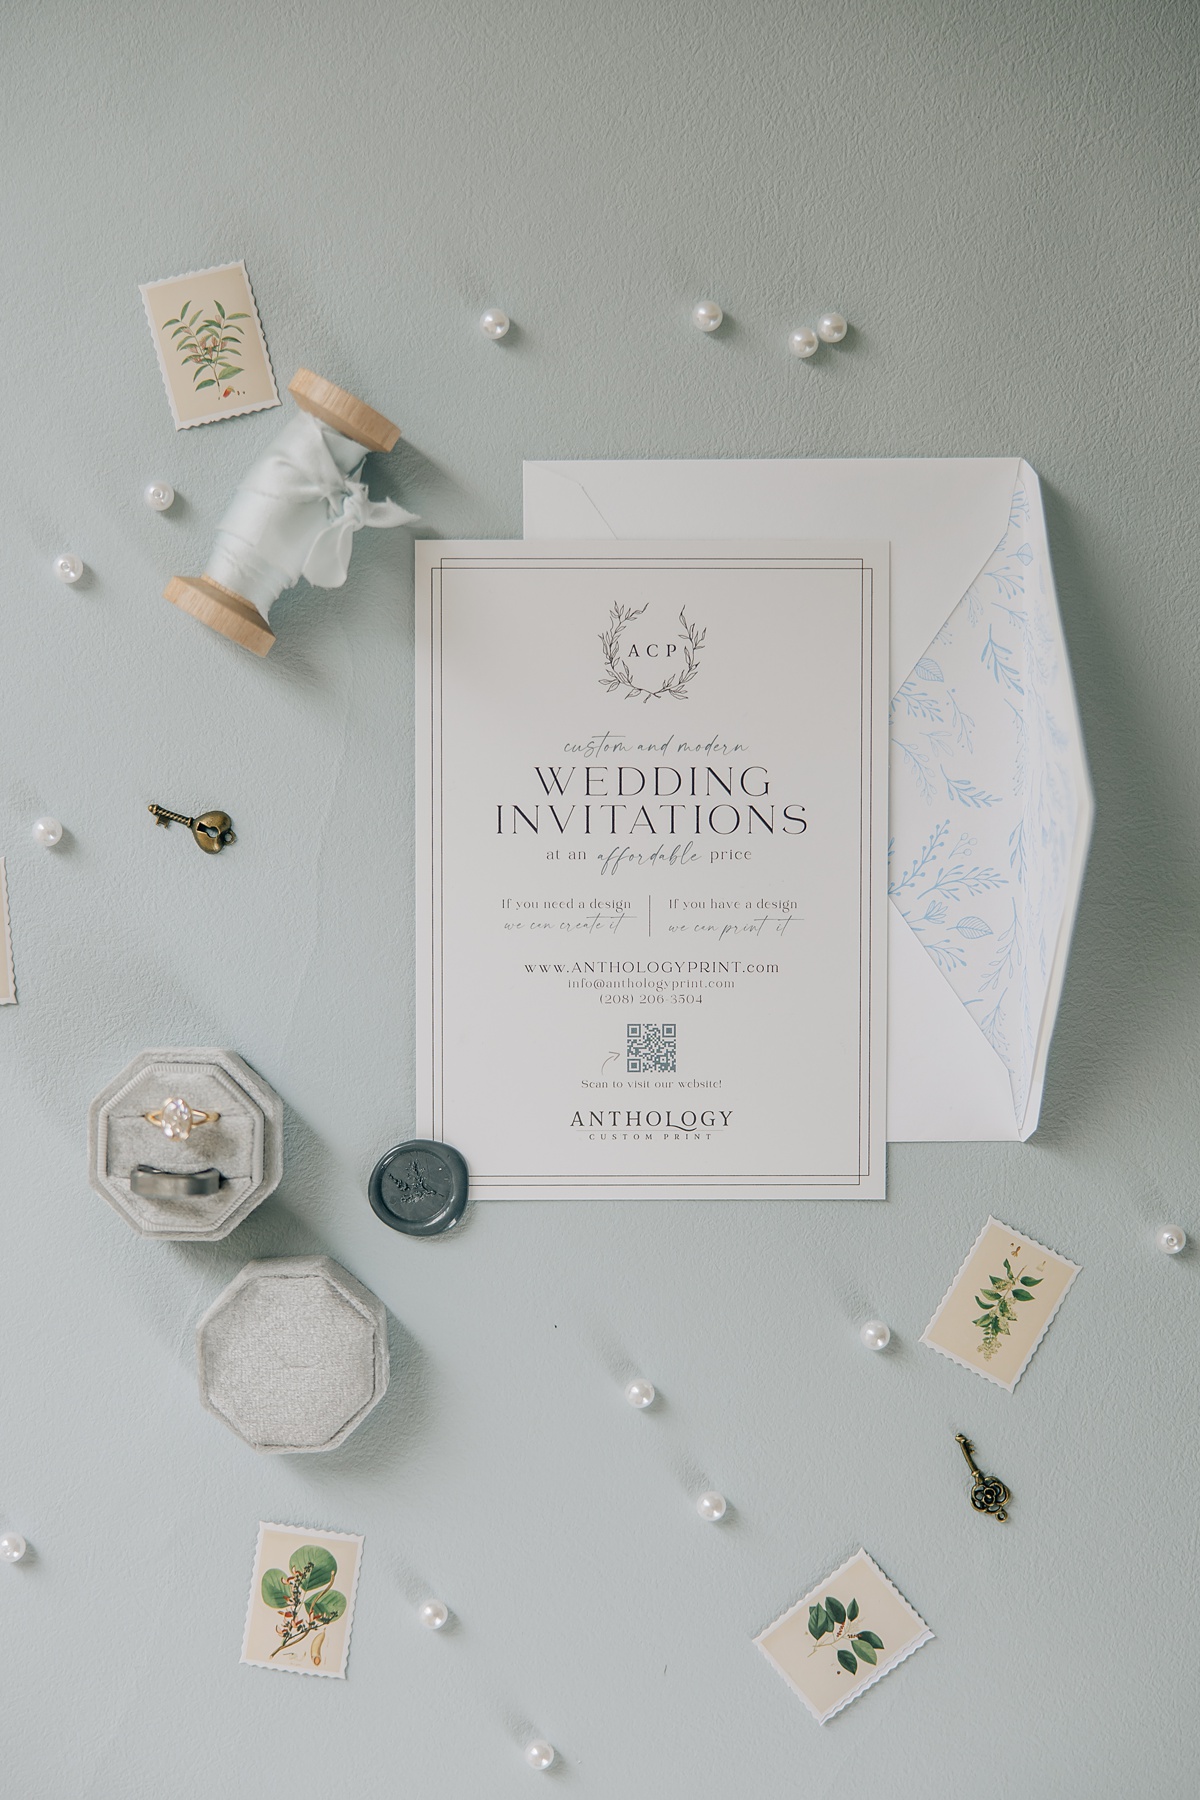 Elevate Your Wedding Photography with These Wedding Flat Lays Tips